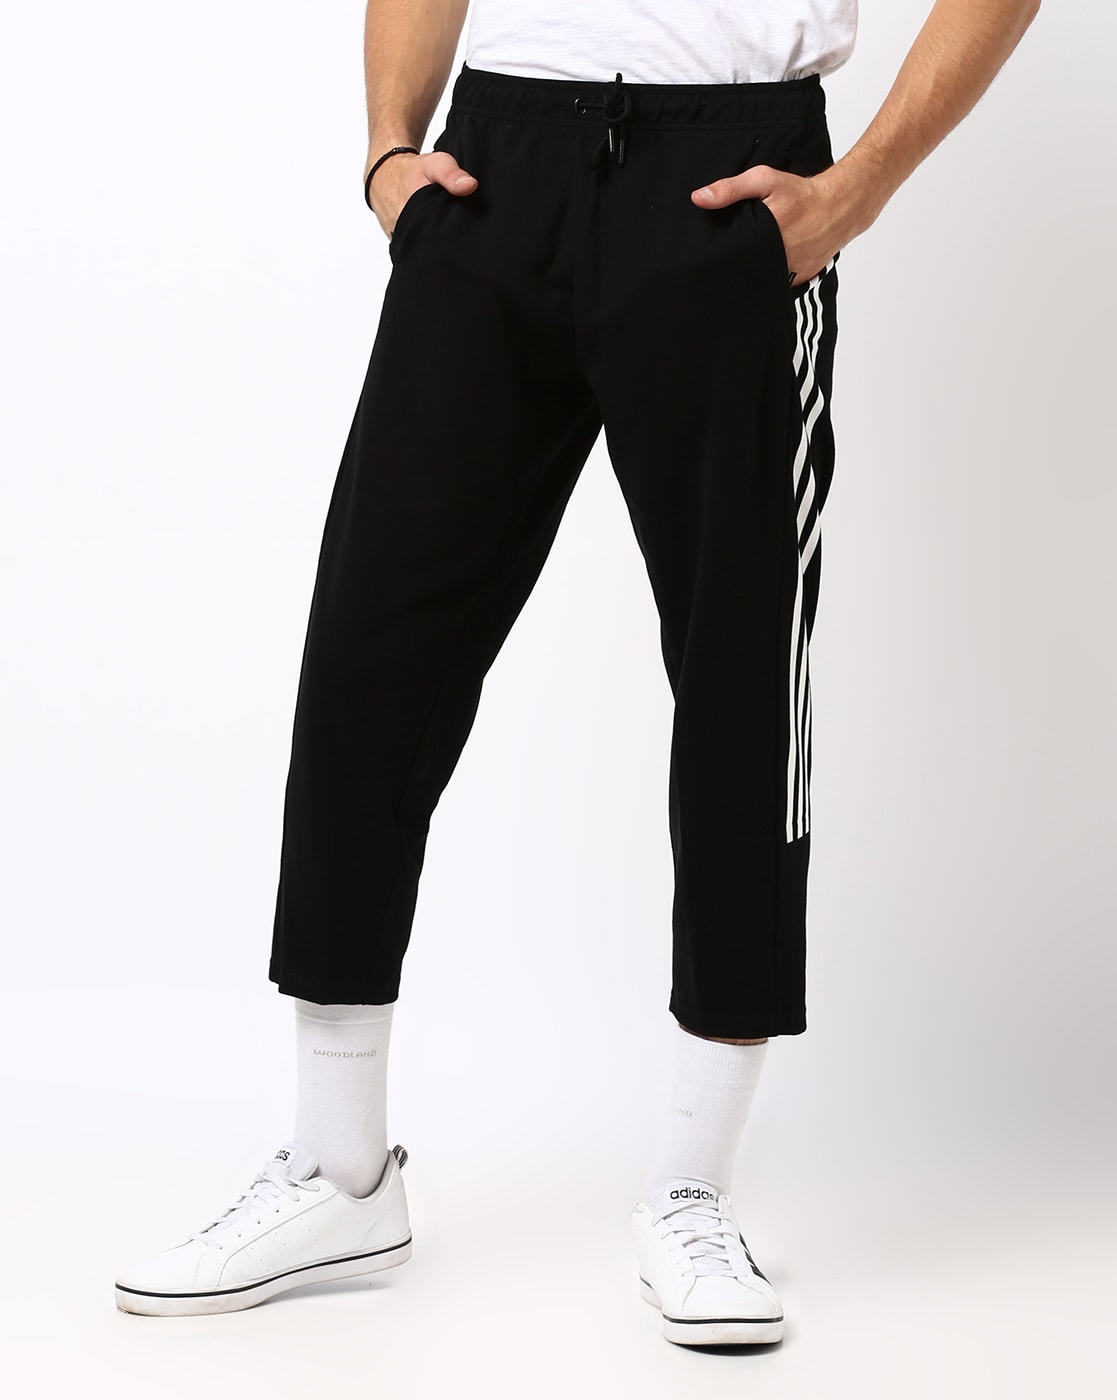 Adidas Id Kn Striker Black Striped Track Pants 6500193htm  Buy Adidas Id  Kn Striker Black Striped Track Pants 6500193htm online in India